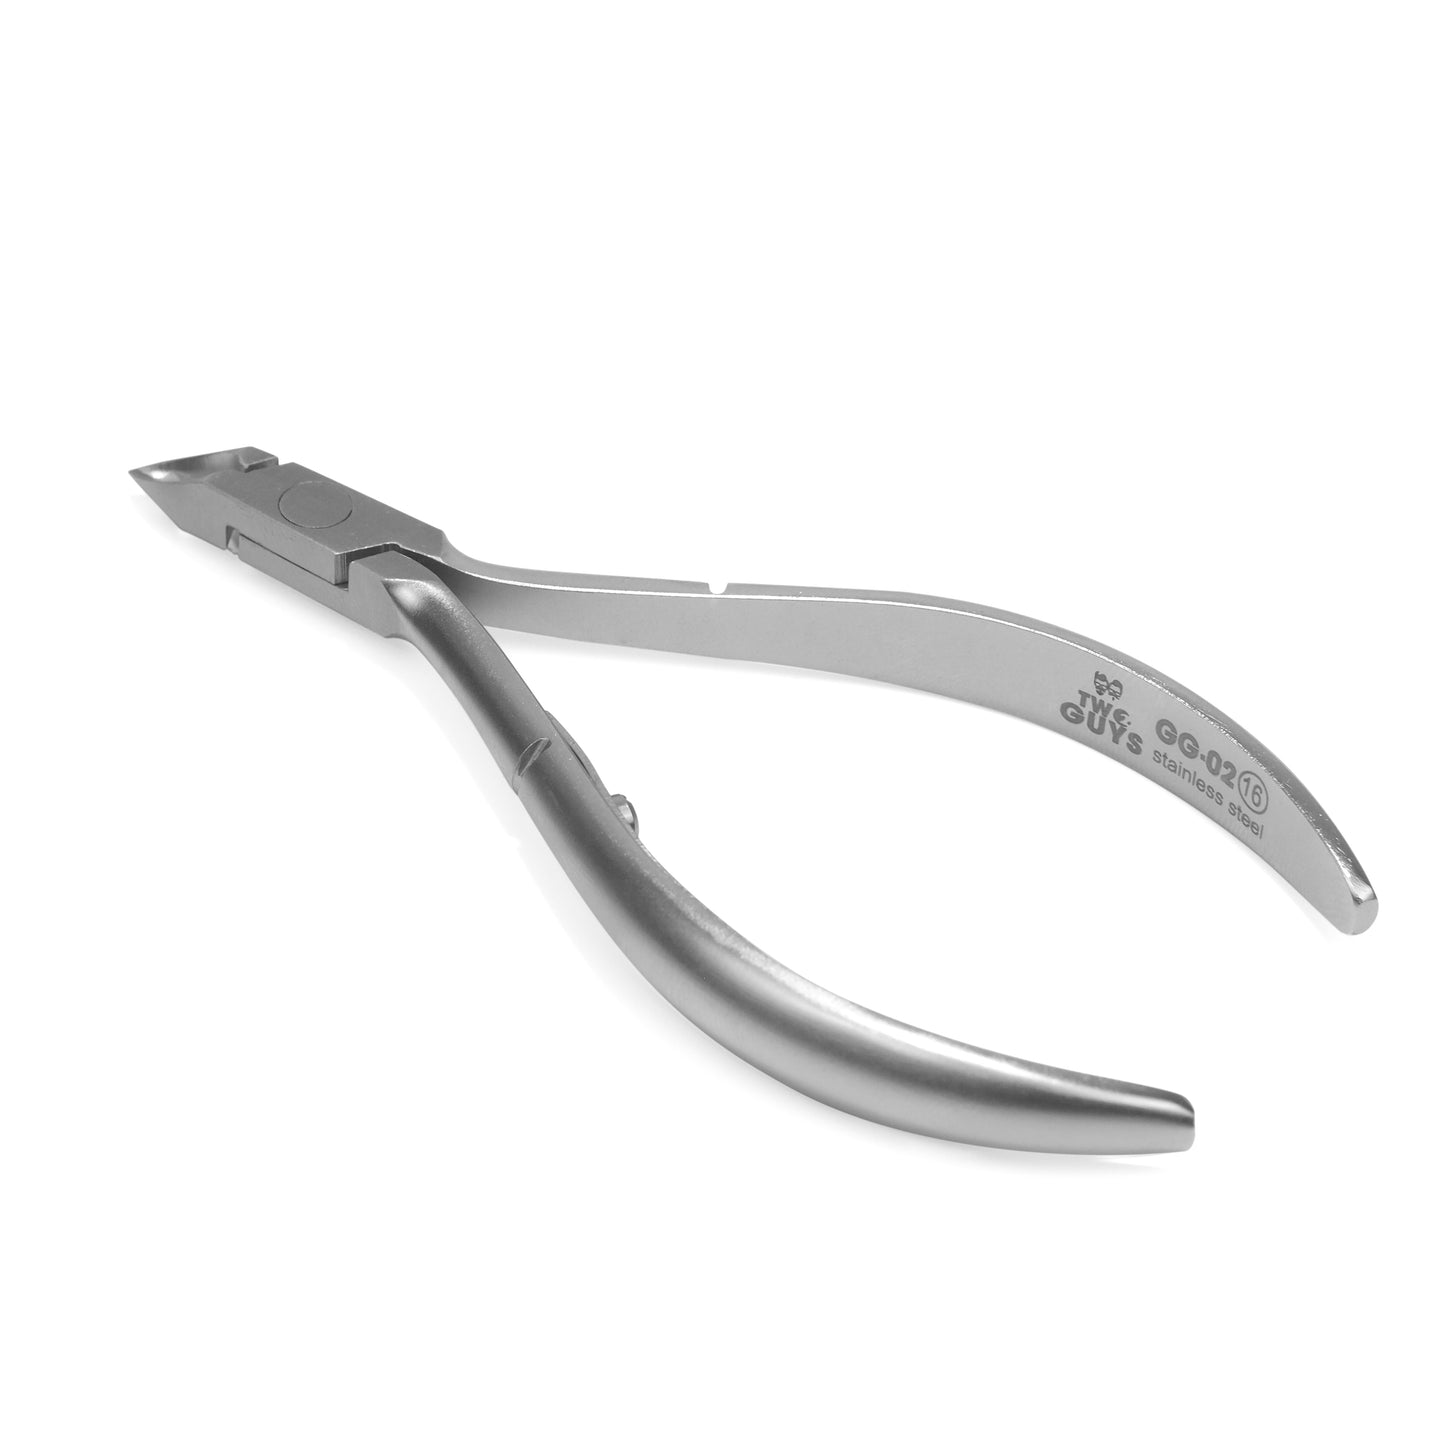 Cuticle Nipper - GG-02 (Jaw 16 / Stainless Steel)